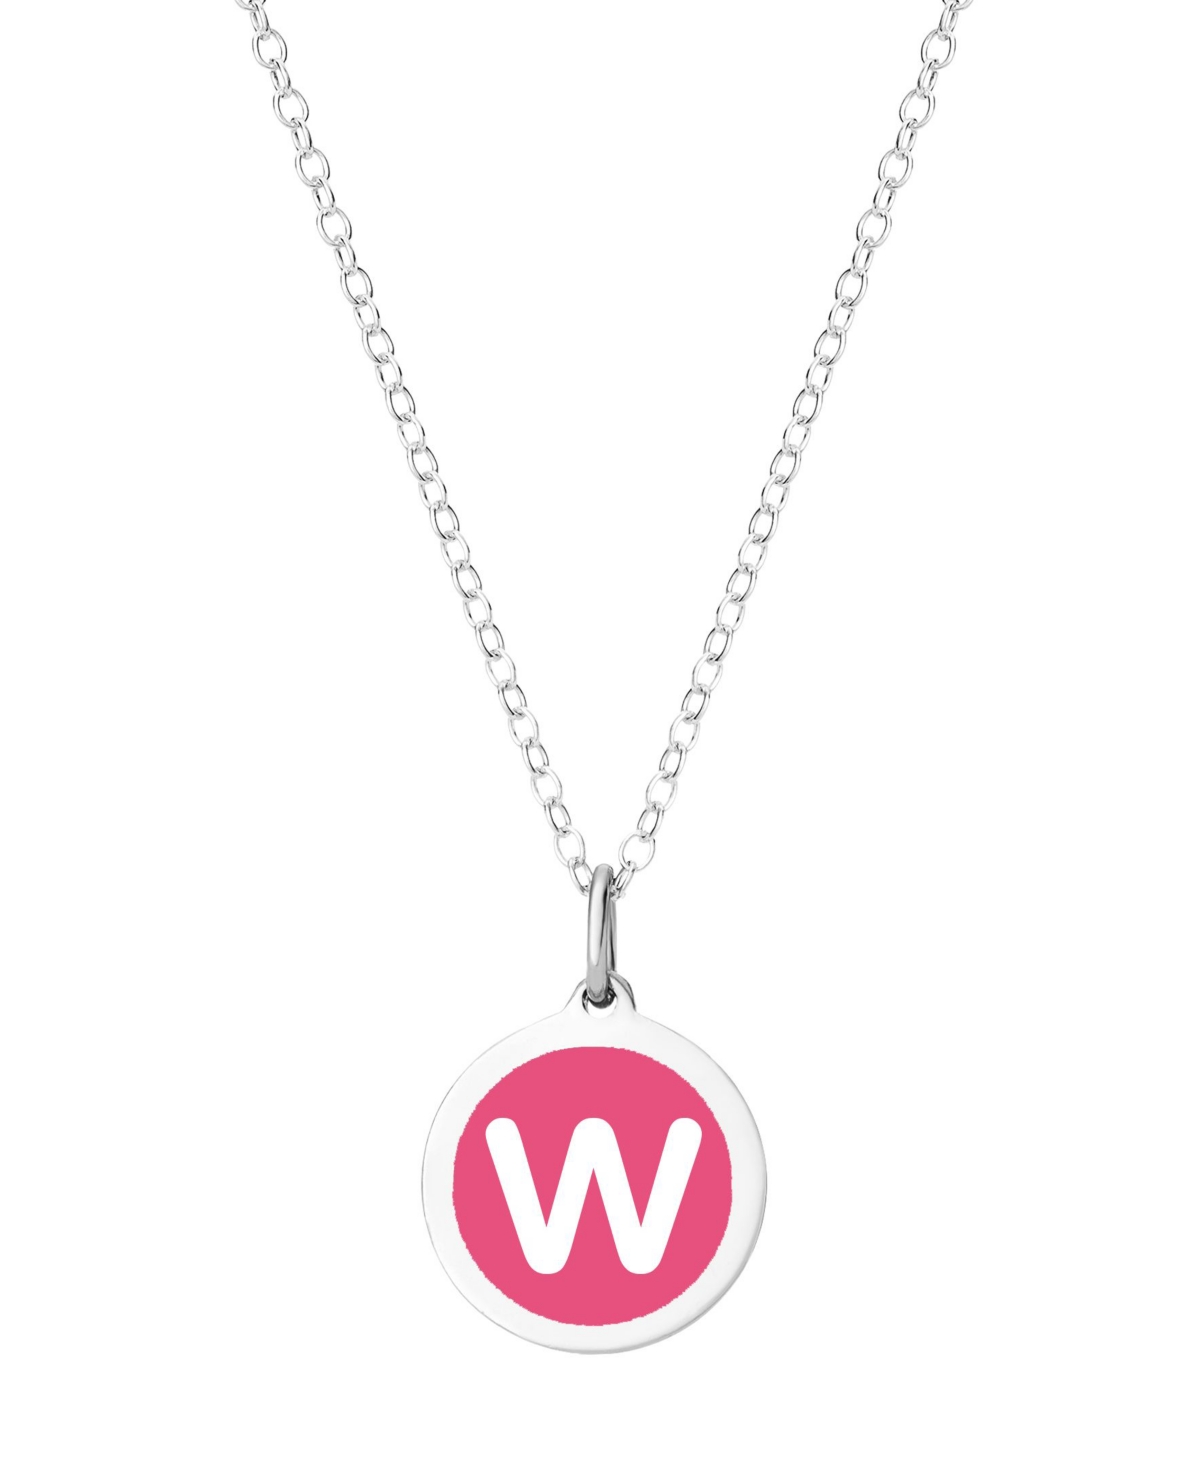 Mini Initial Pendant Necklace in Sterling Silver and Hot Pink Enamel, 16" + 2" Extender - Hot Pink-Z